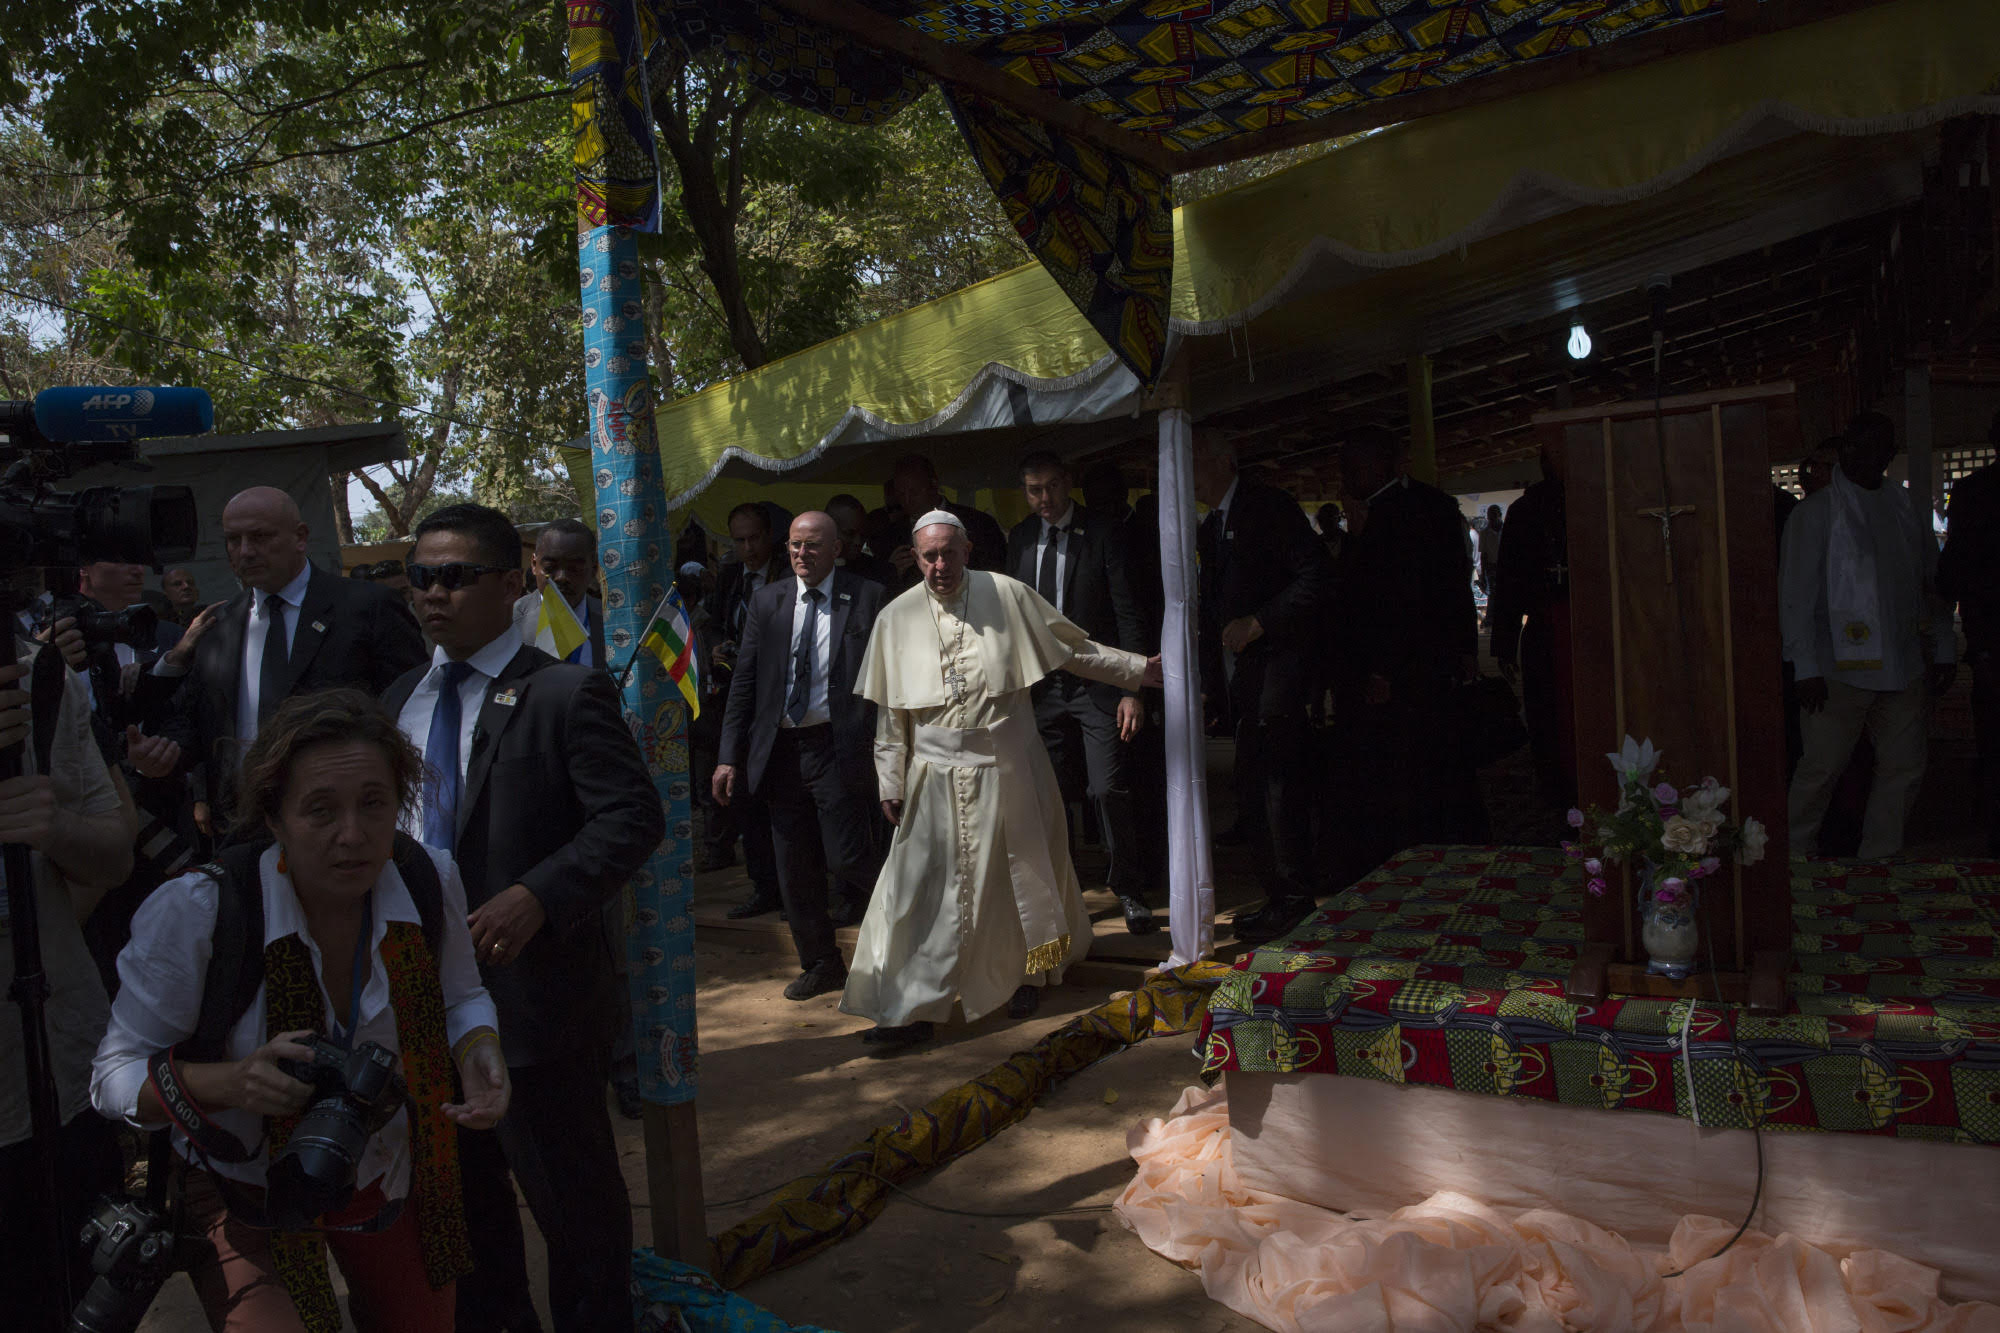 Le Monde: Pope in BanguiPope Francis visits Saint Sauveur parish, where nearly 4000 displaced live, in Bangui, Central African Republic, Nov. 29, 2015.